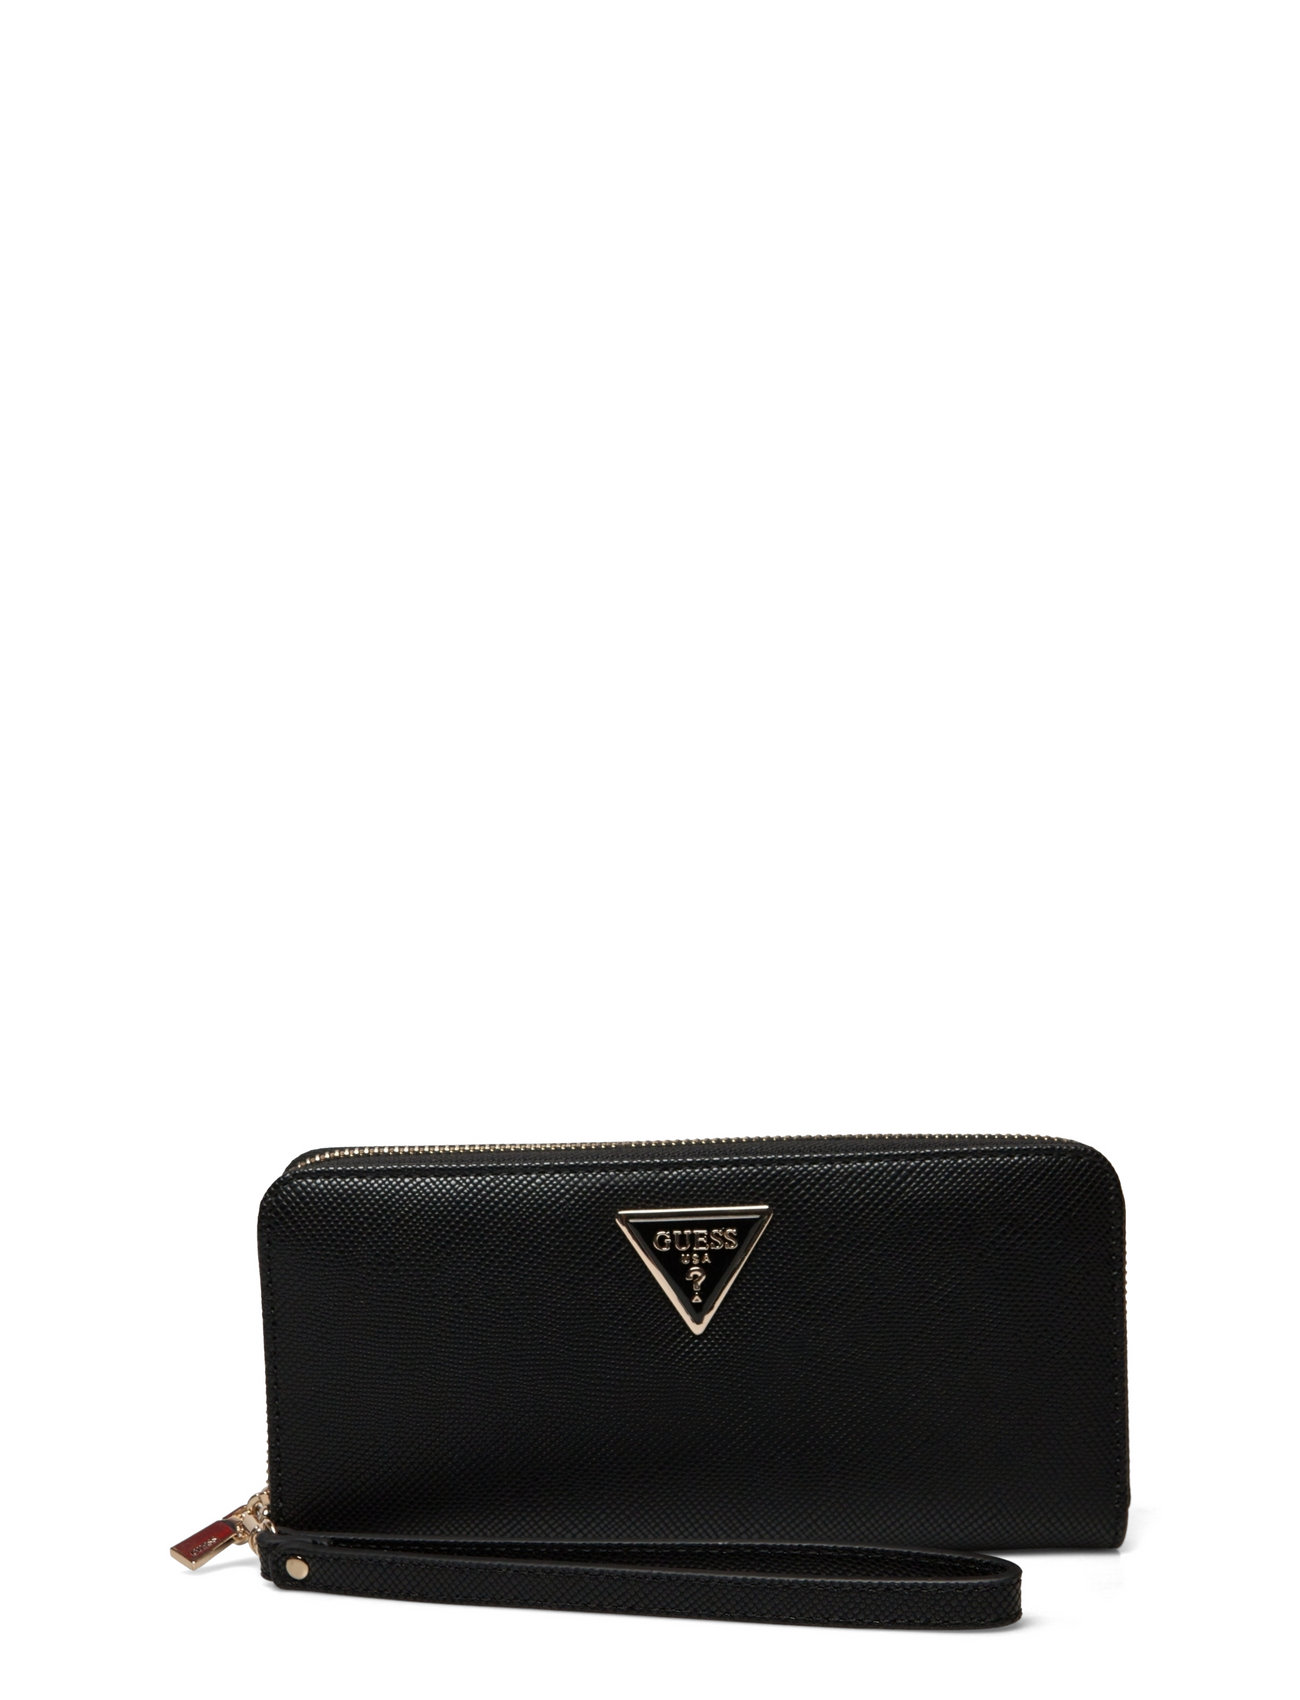 GUESS Laurel Slg Large Zip Around Wallets